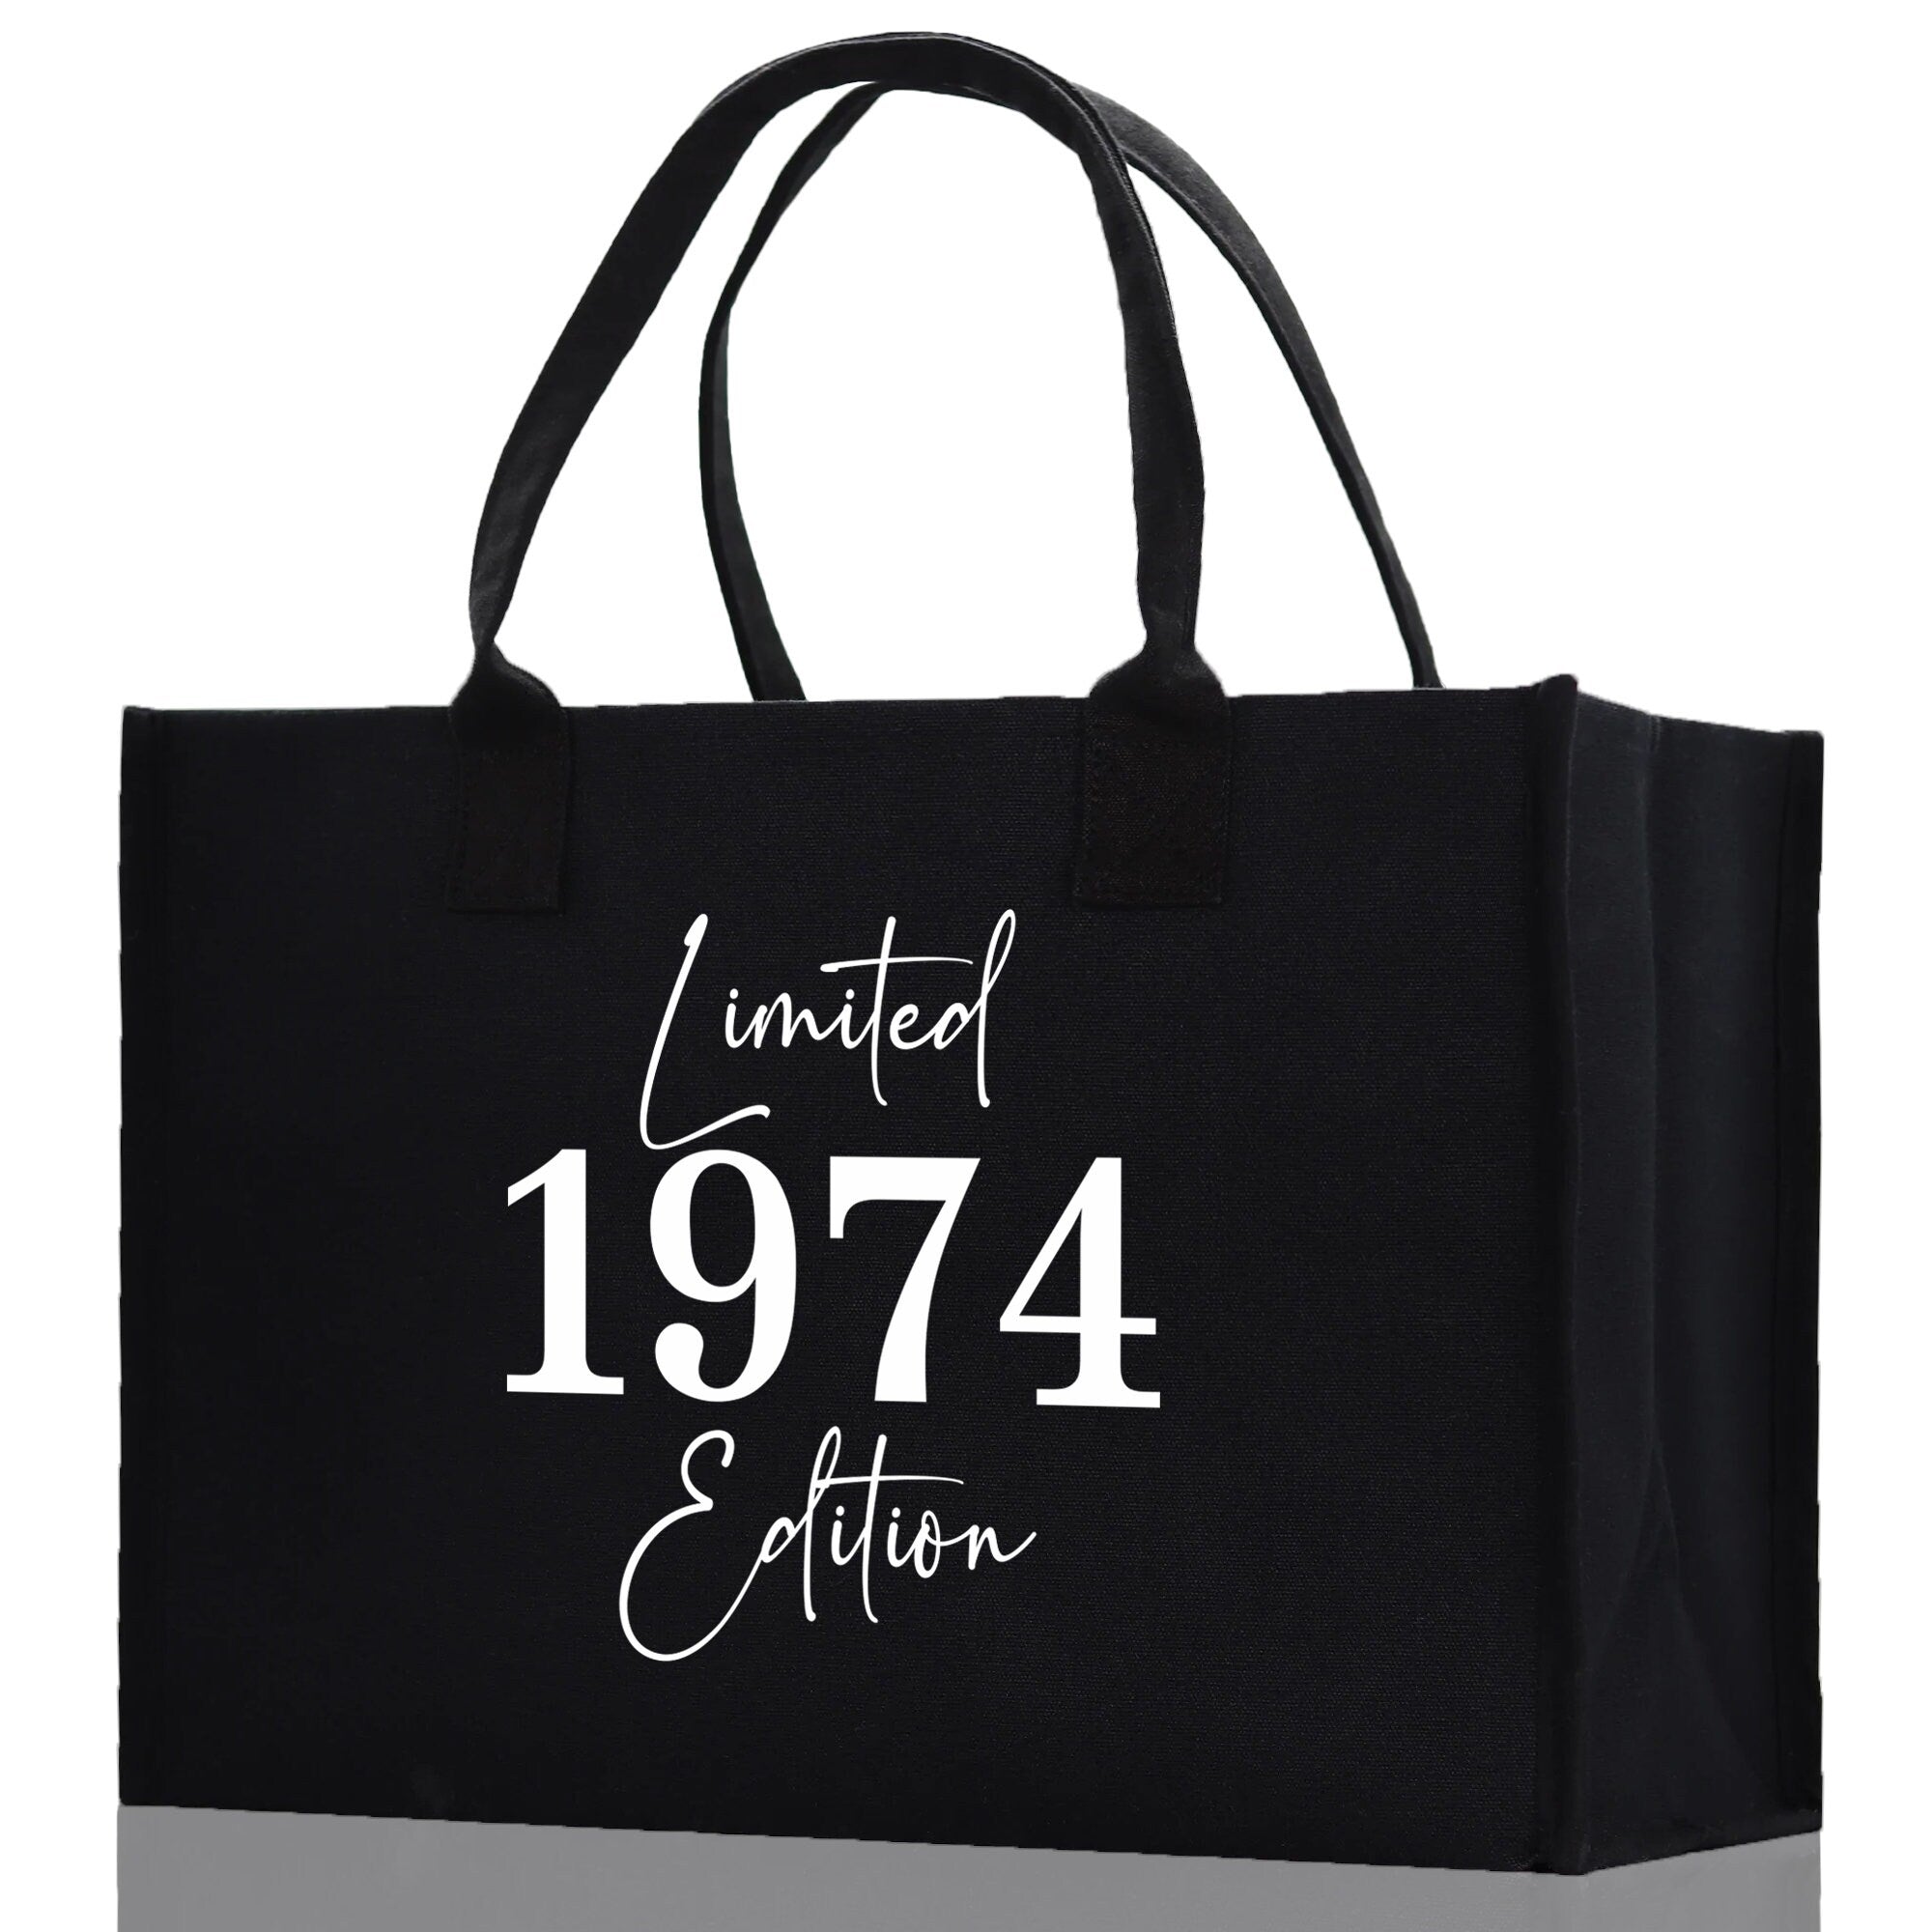 a black shopping bag with the year 1974 printed on it